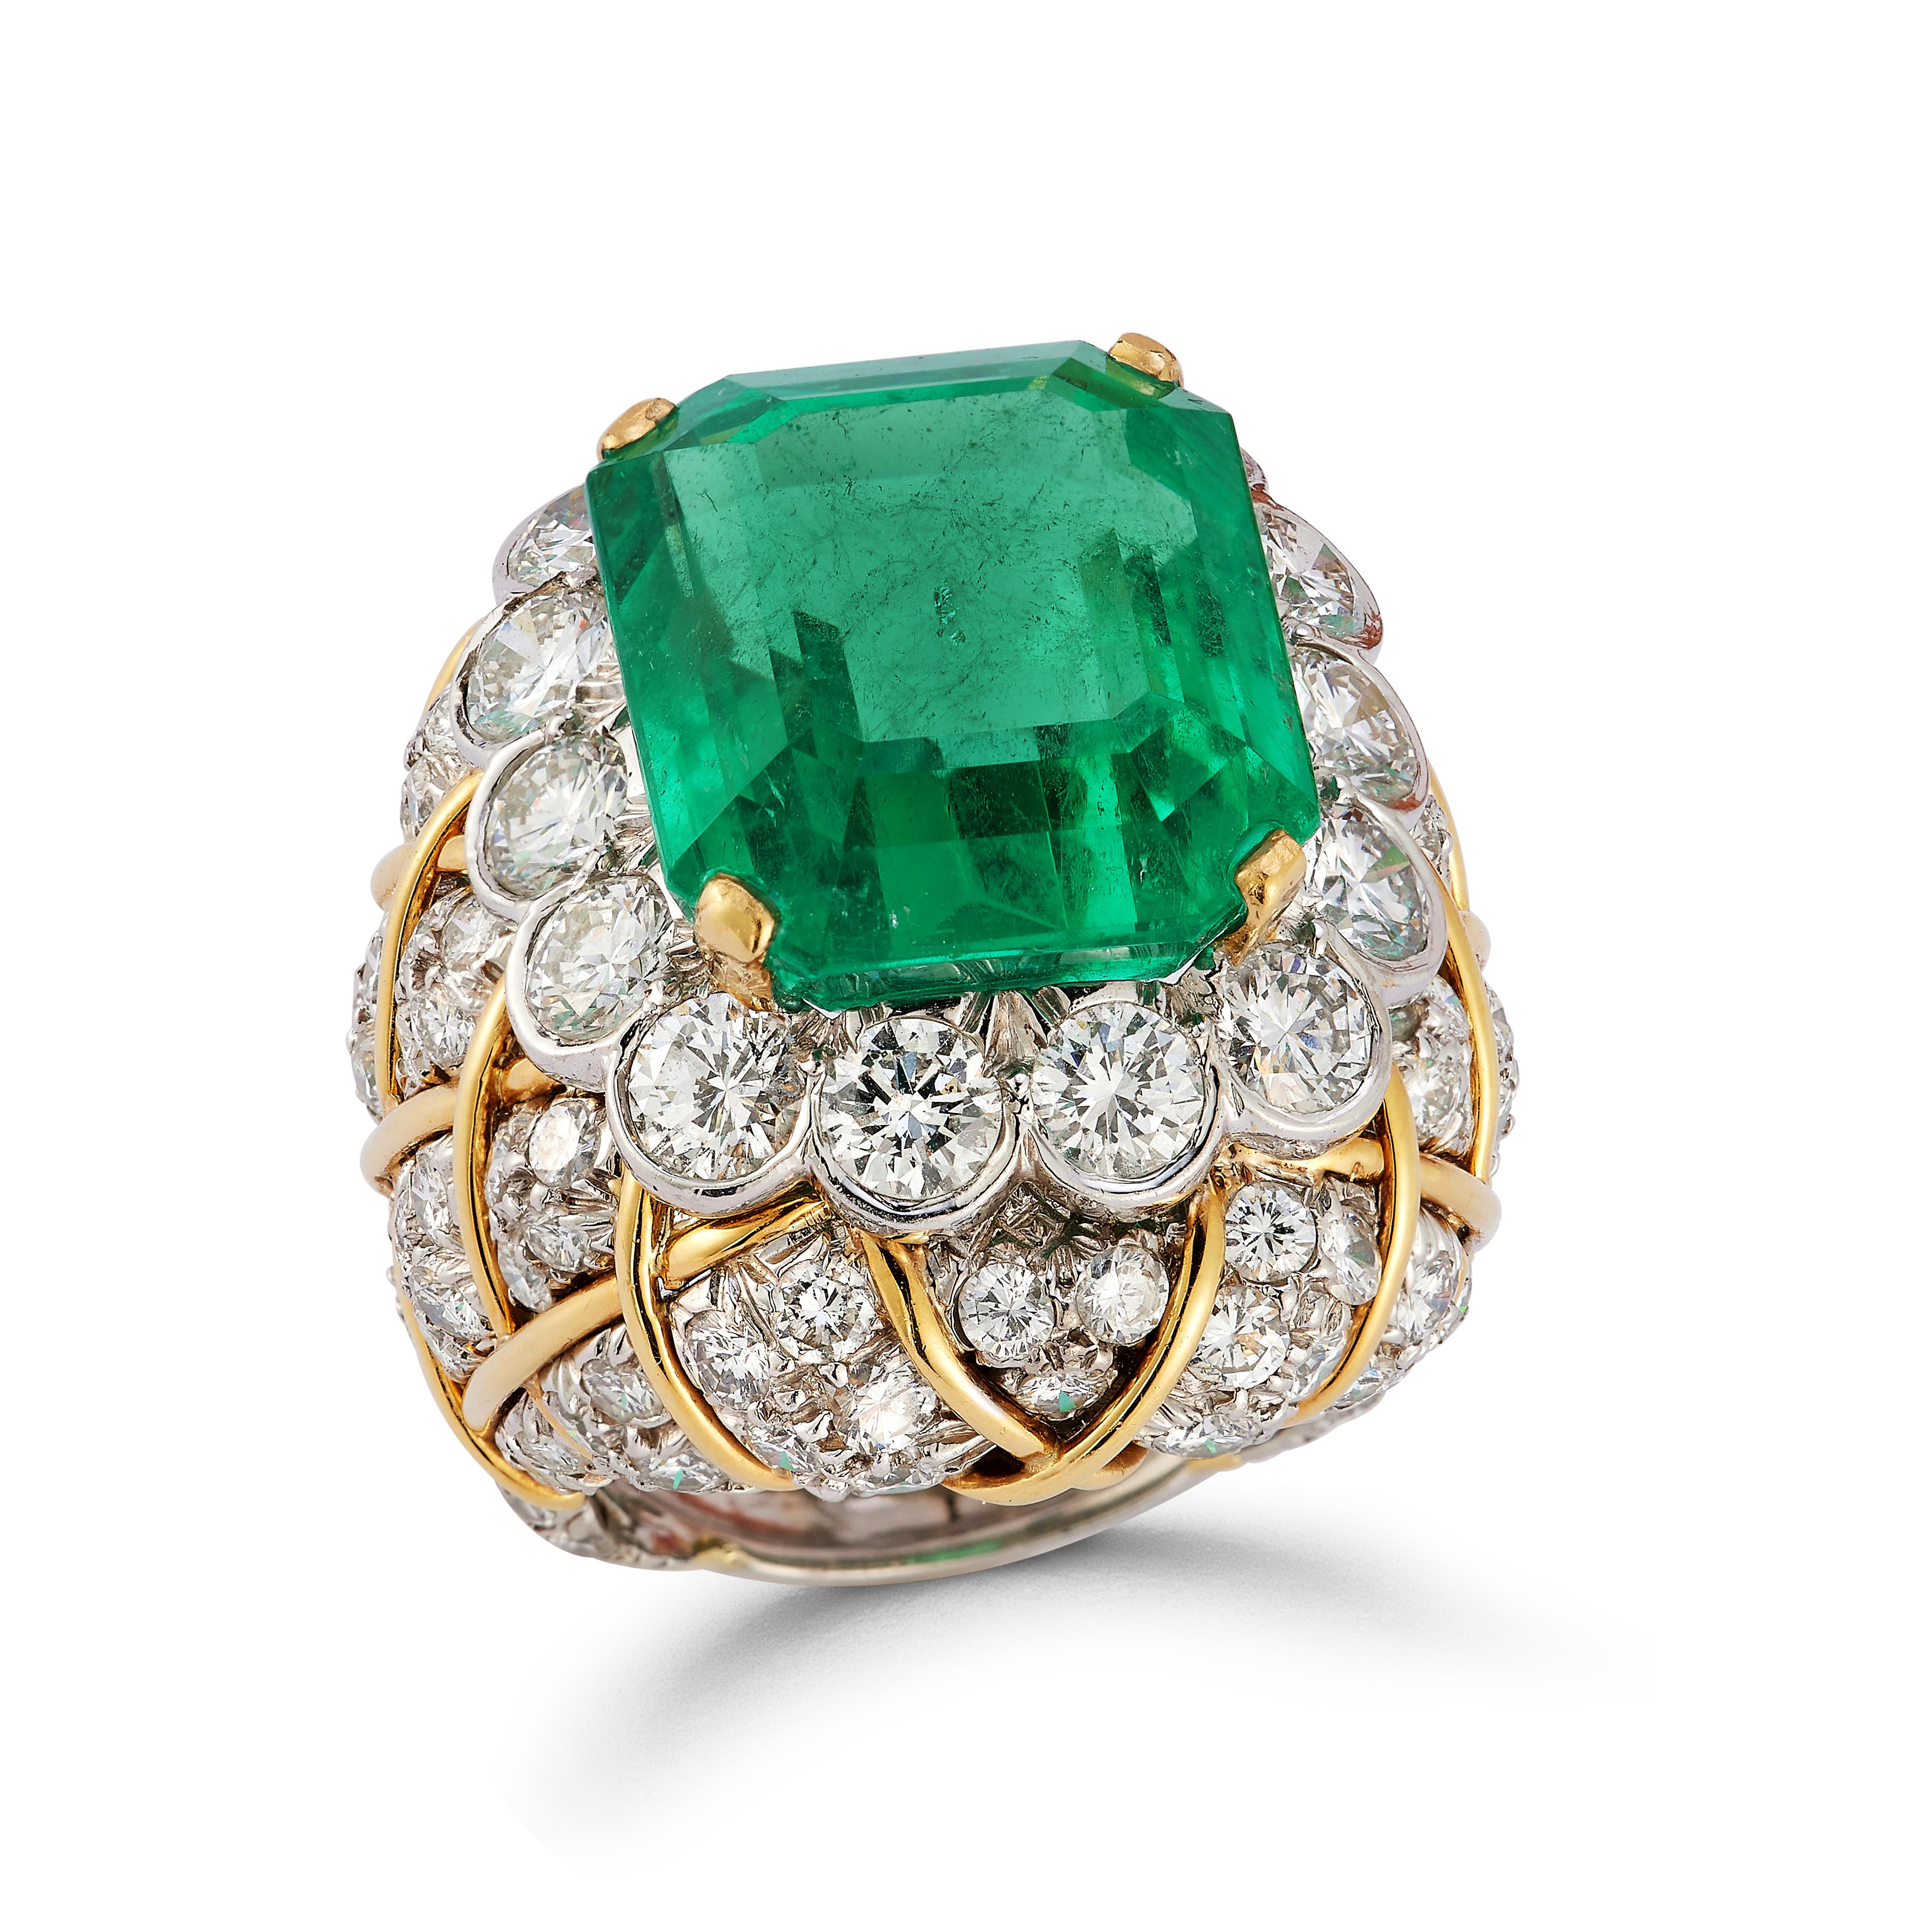 David Webb 19 Carat Colombian Emerald & Diamond Ring

A platinum and 18 karat gold ring featuring a GIA certified octagonal cut Colombian emerald surrounded by round cut diamonds.

Accompanied with certificate of authenticity and a GIA report on the